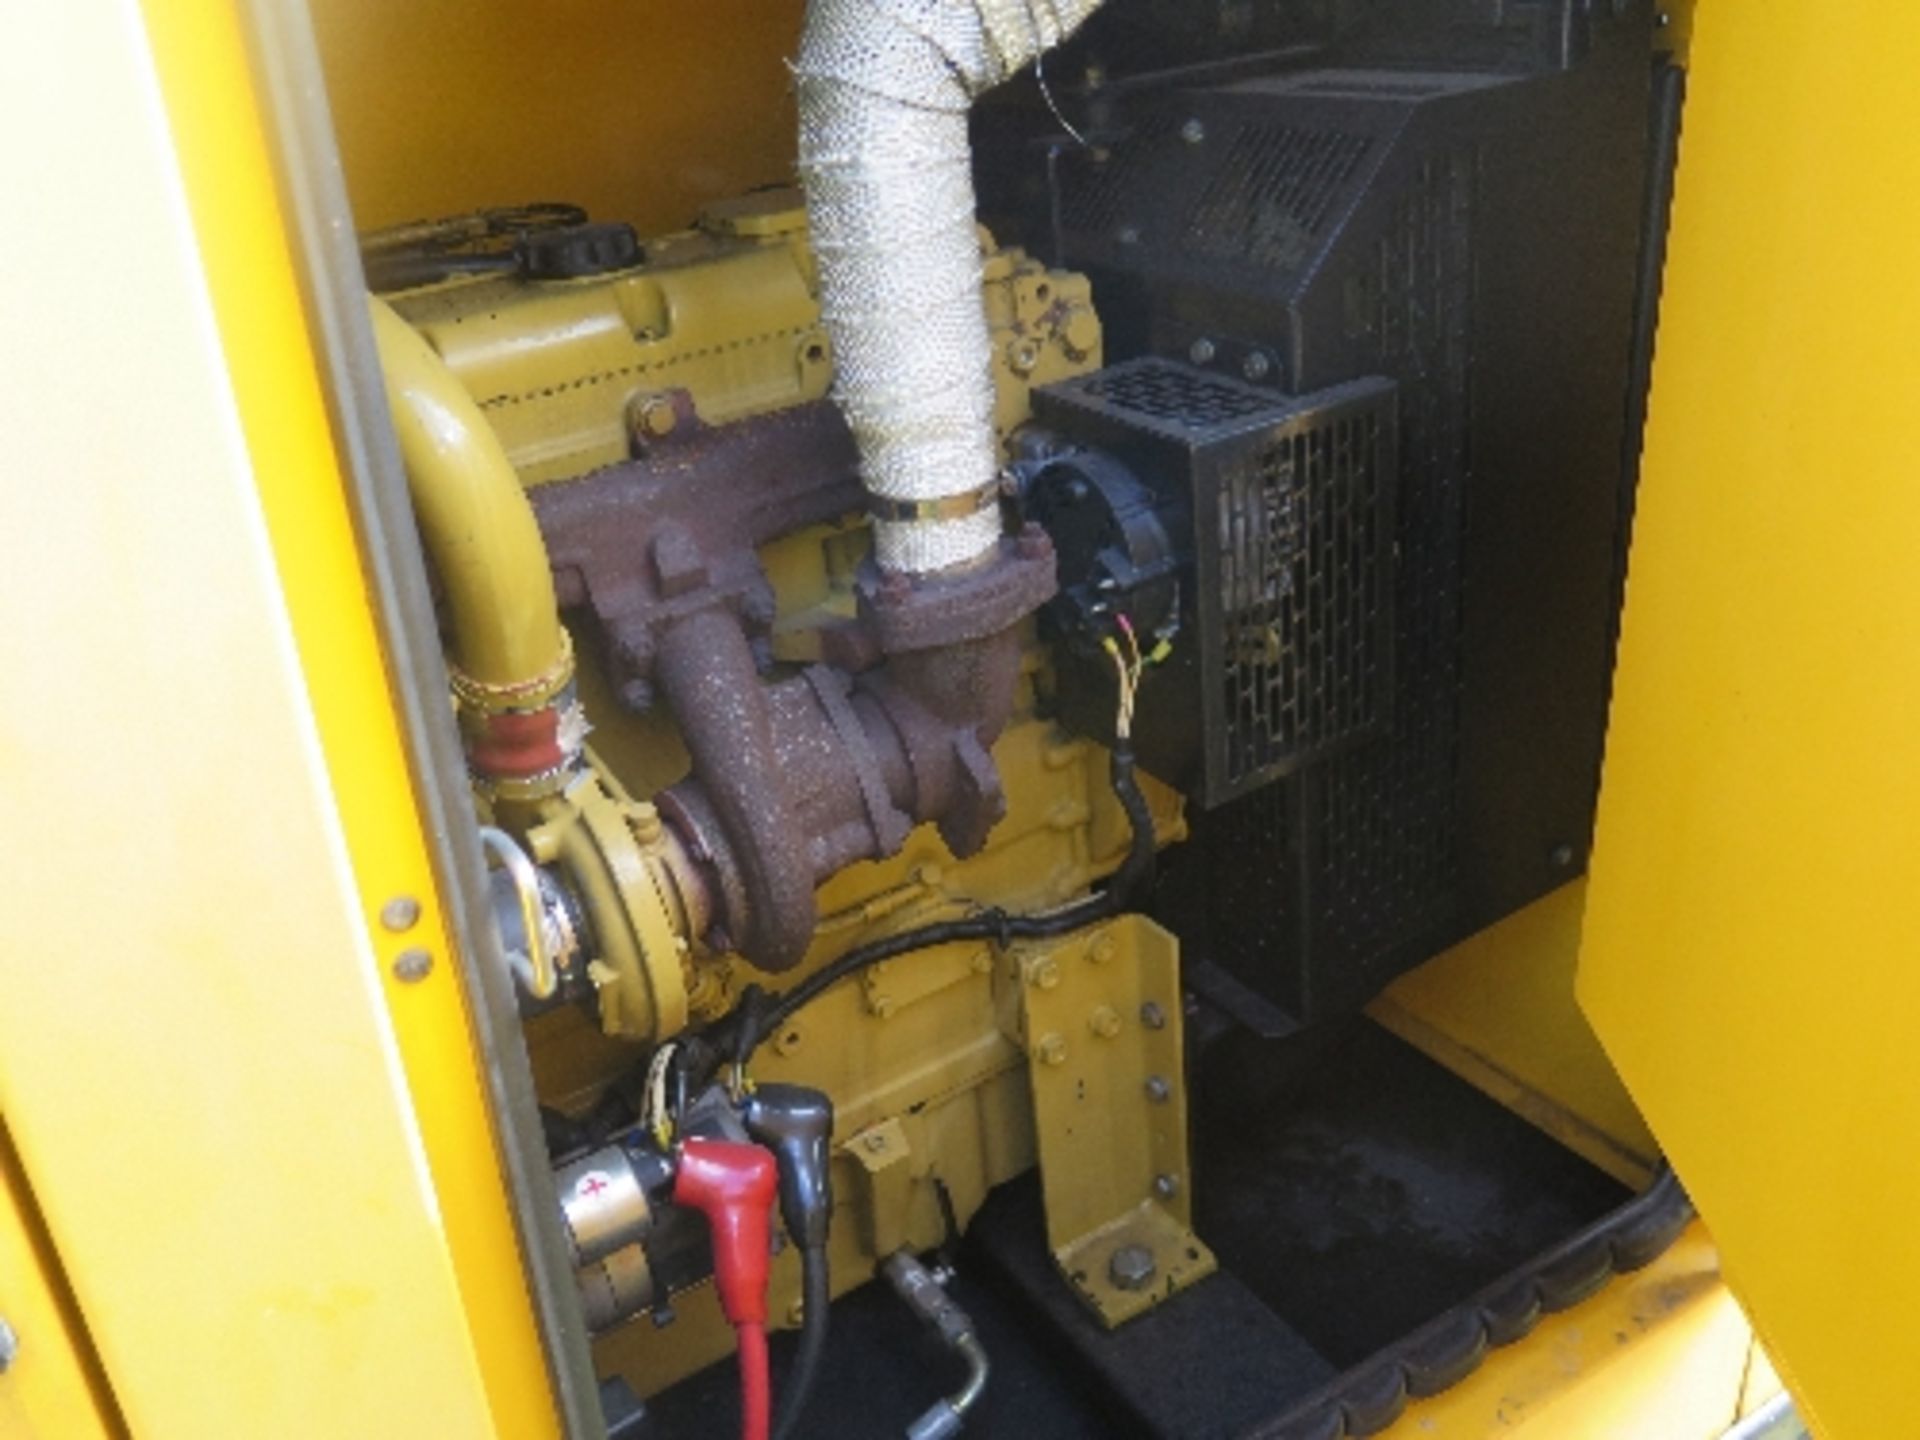 Caterpillar XQE80 generator 14819 hrs 157811
PERKINS - RUNS AND MAKES POWER
ALL LOTS are SOLD AS - Image 6 of 6